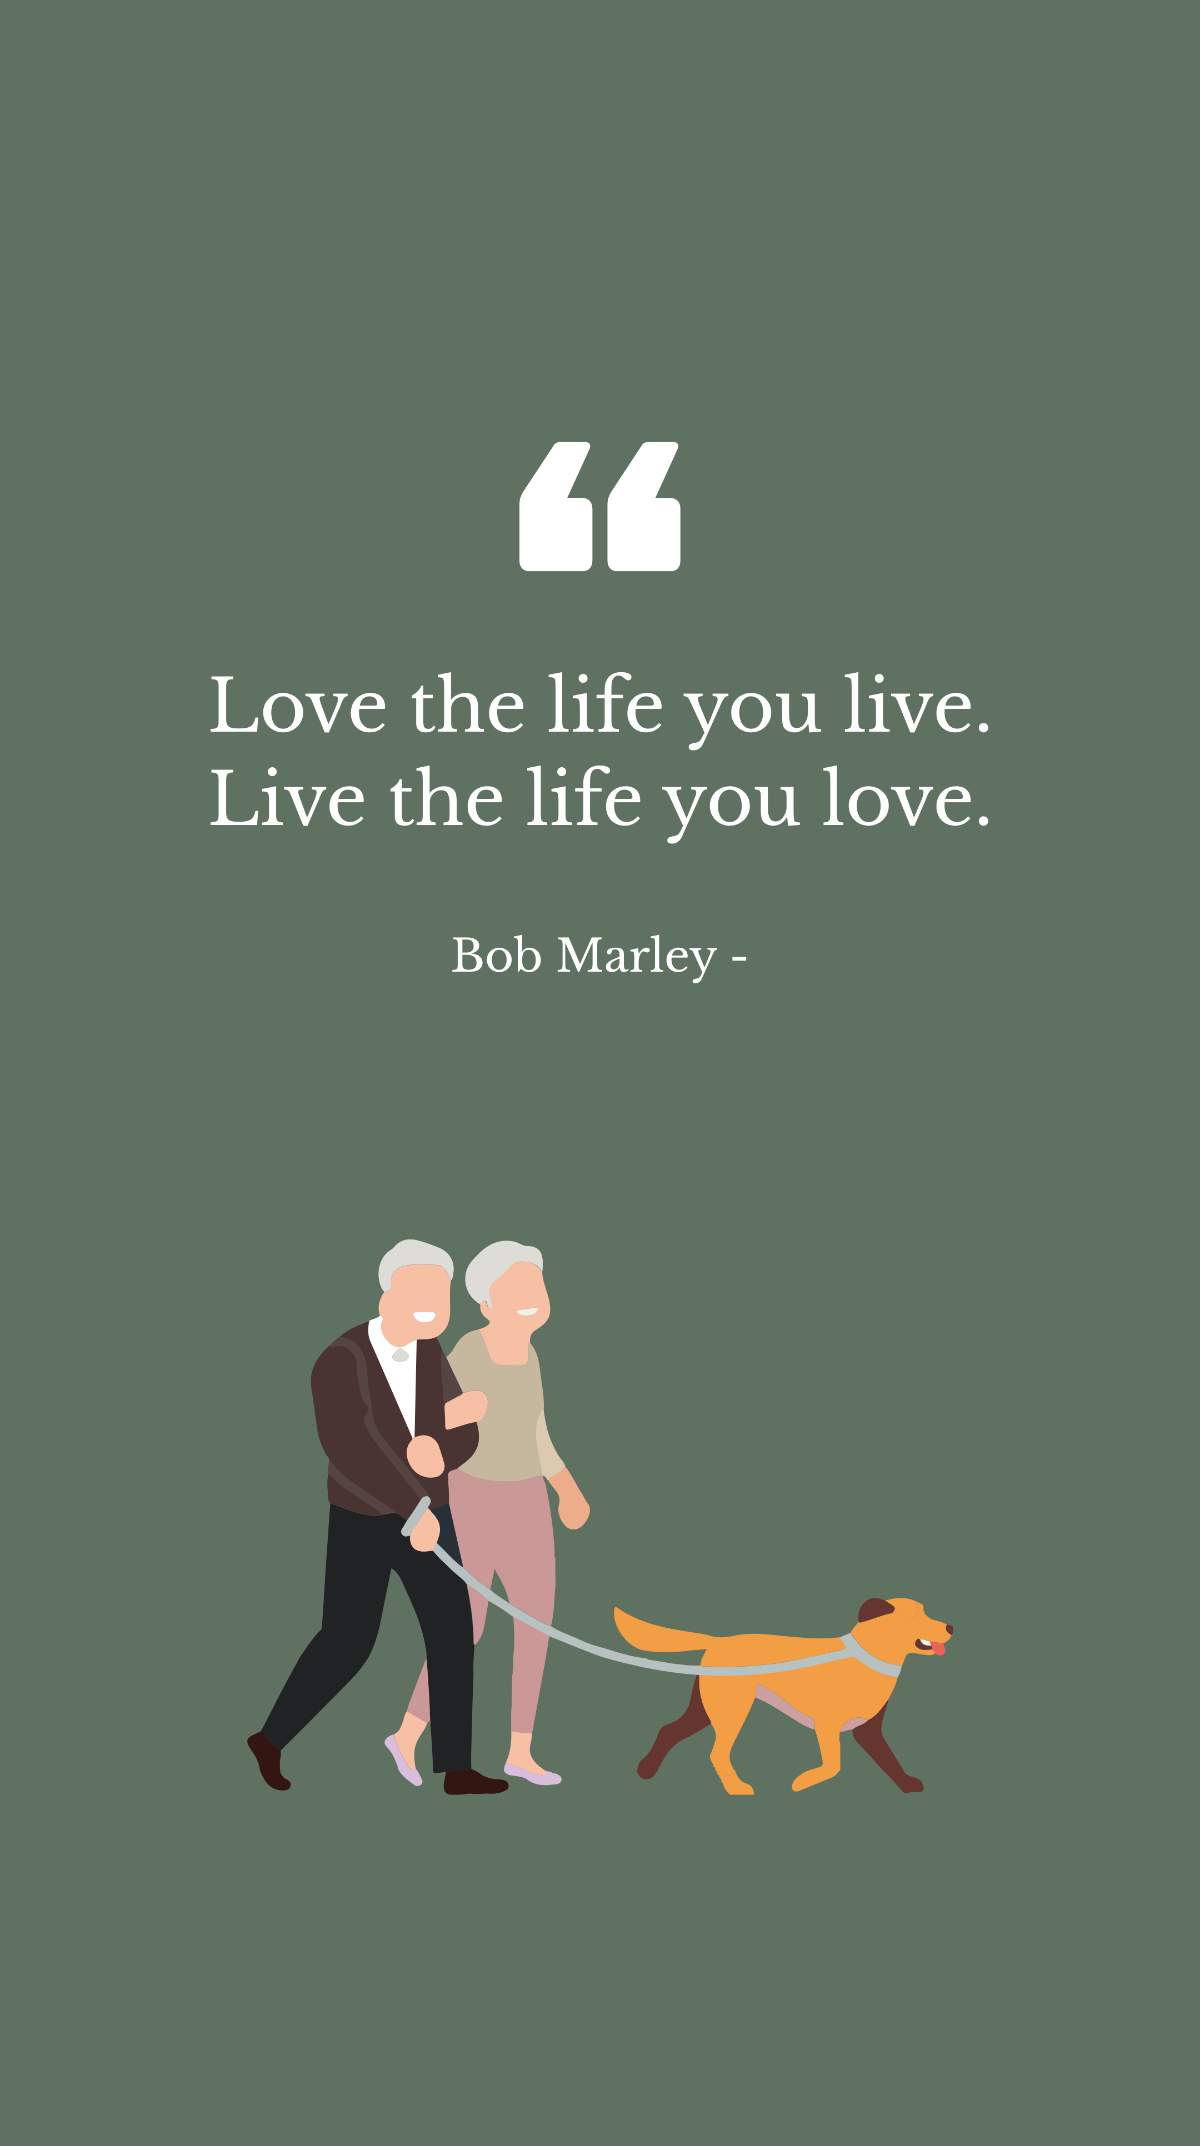 Bob Marley - Love the life you live. Live the life you love.